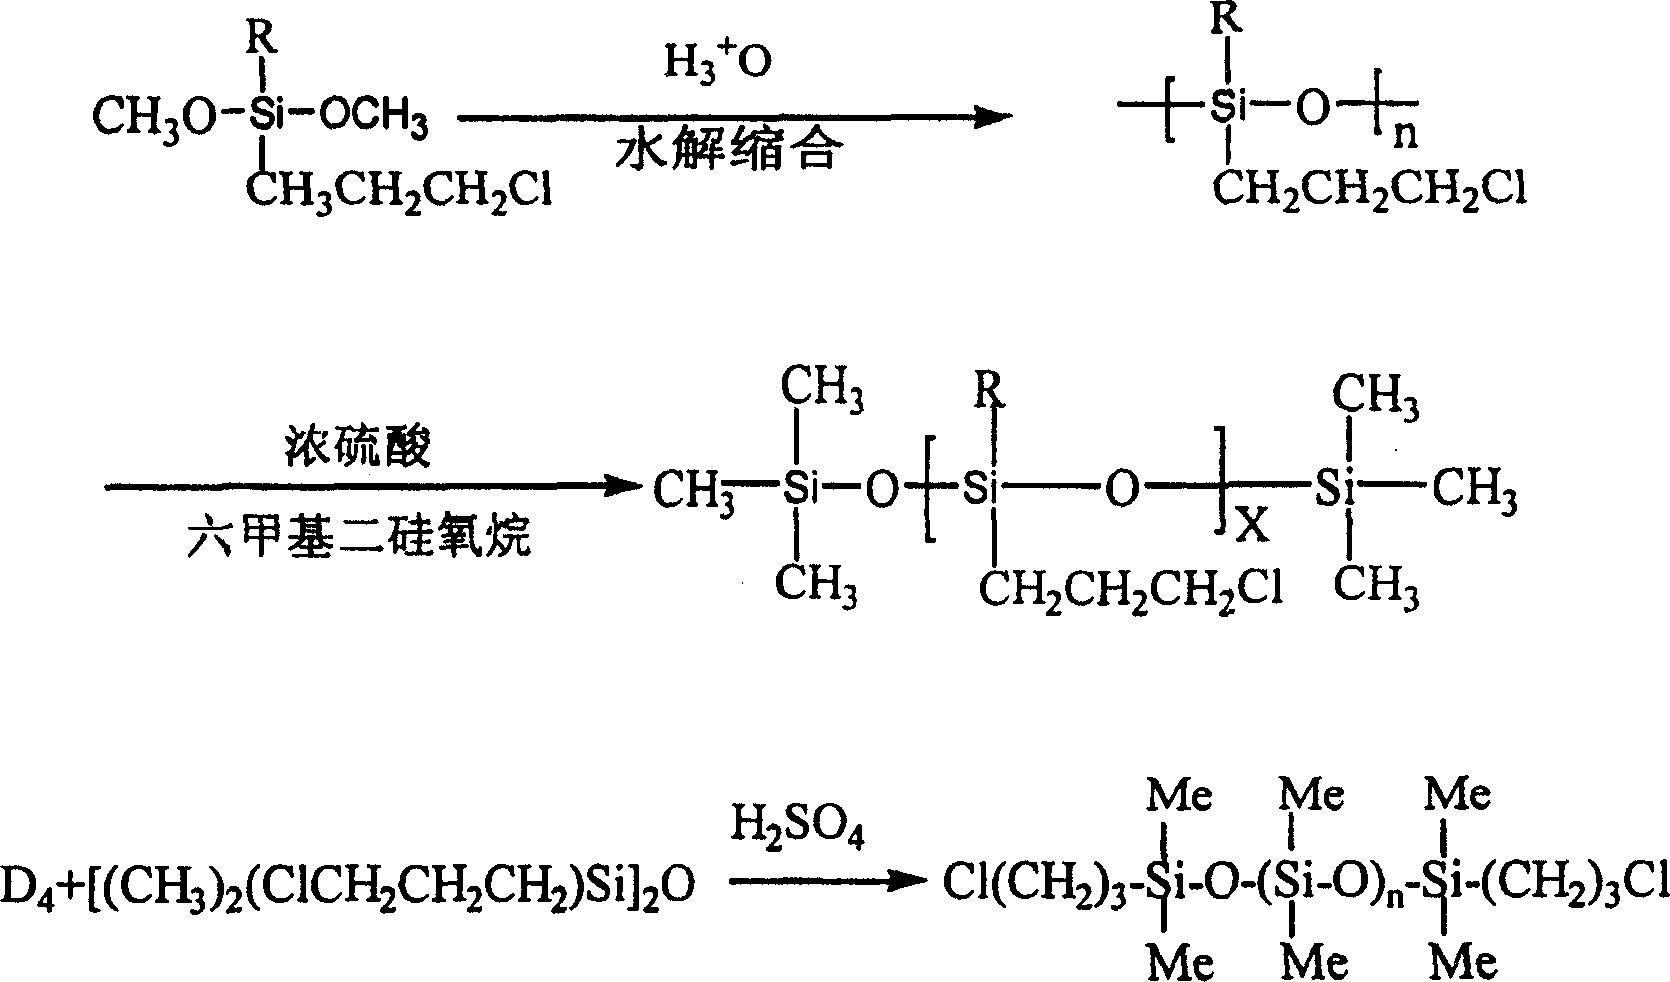 Production of Redix with siloxane structural unit